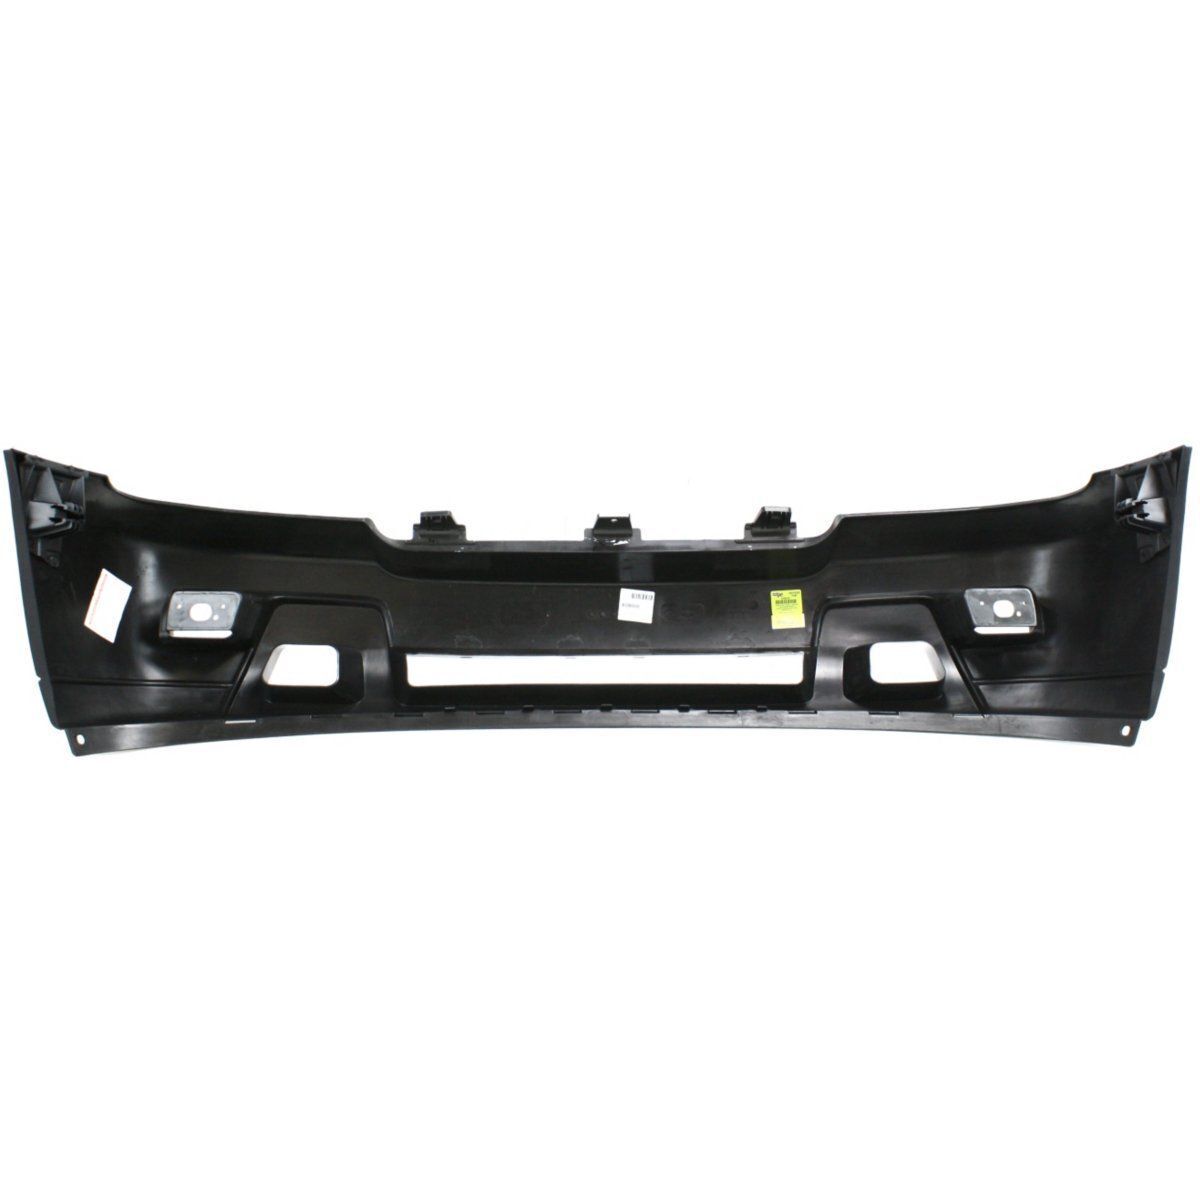 2006-2008 CHEVY TRAILBLAZER; Front Bumper Cover; LT MODEL w/Fog Painted to Match